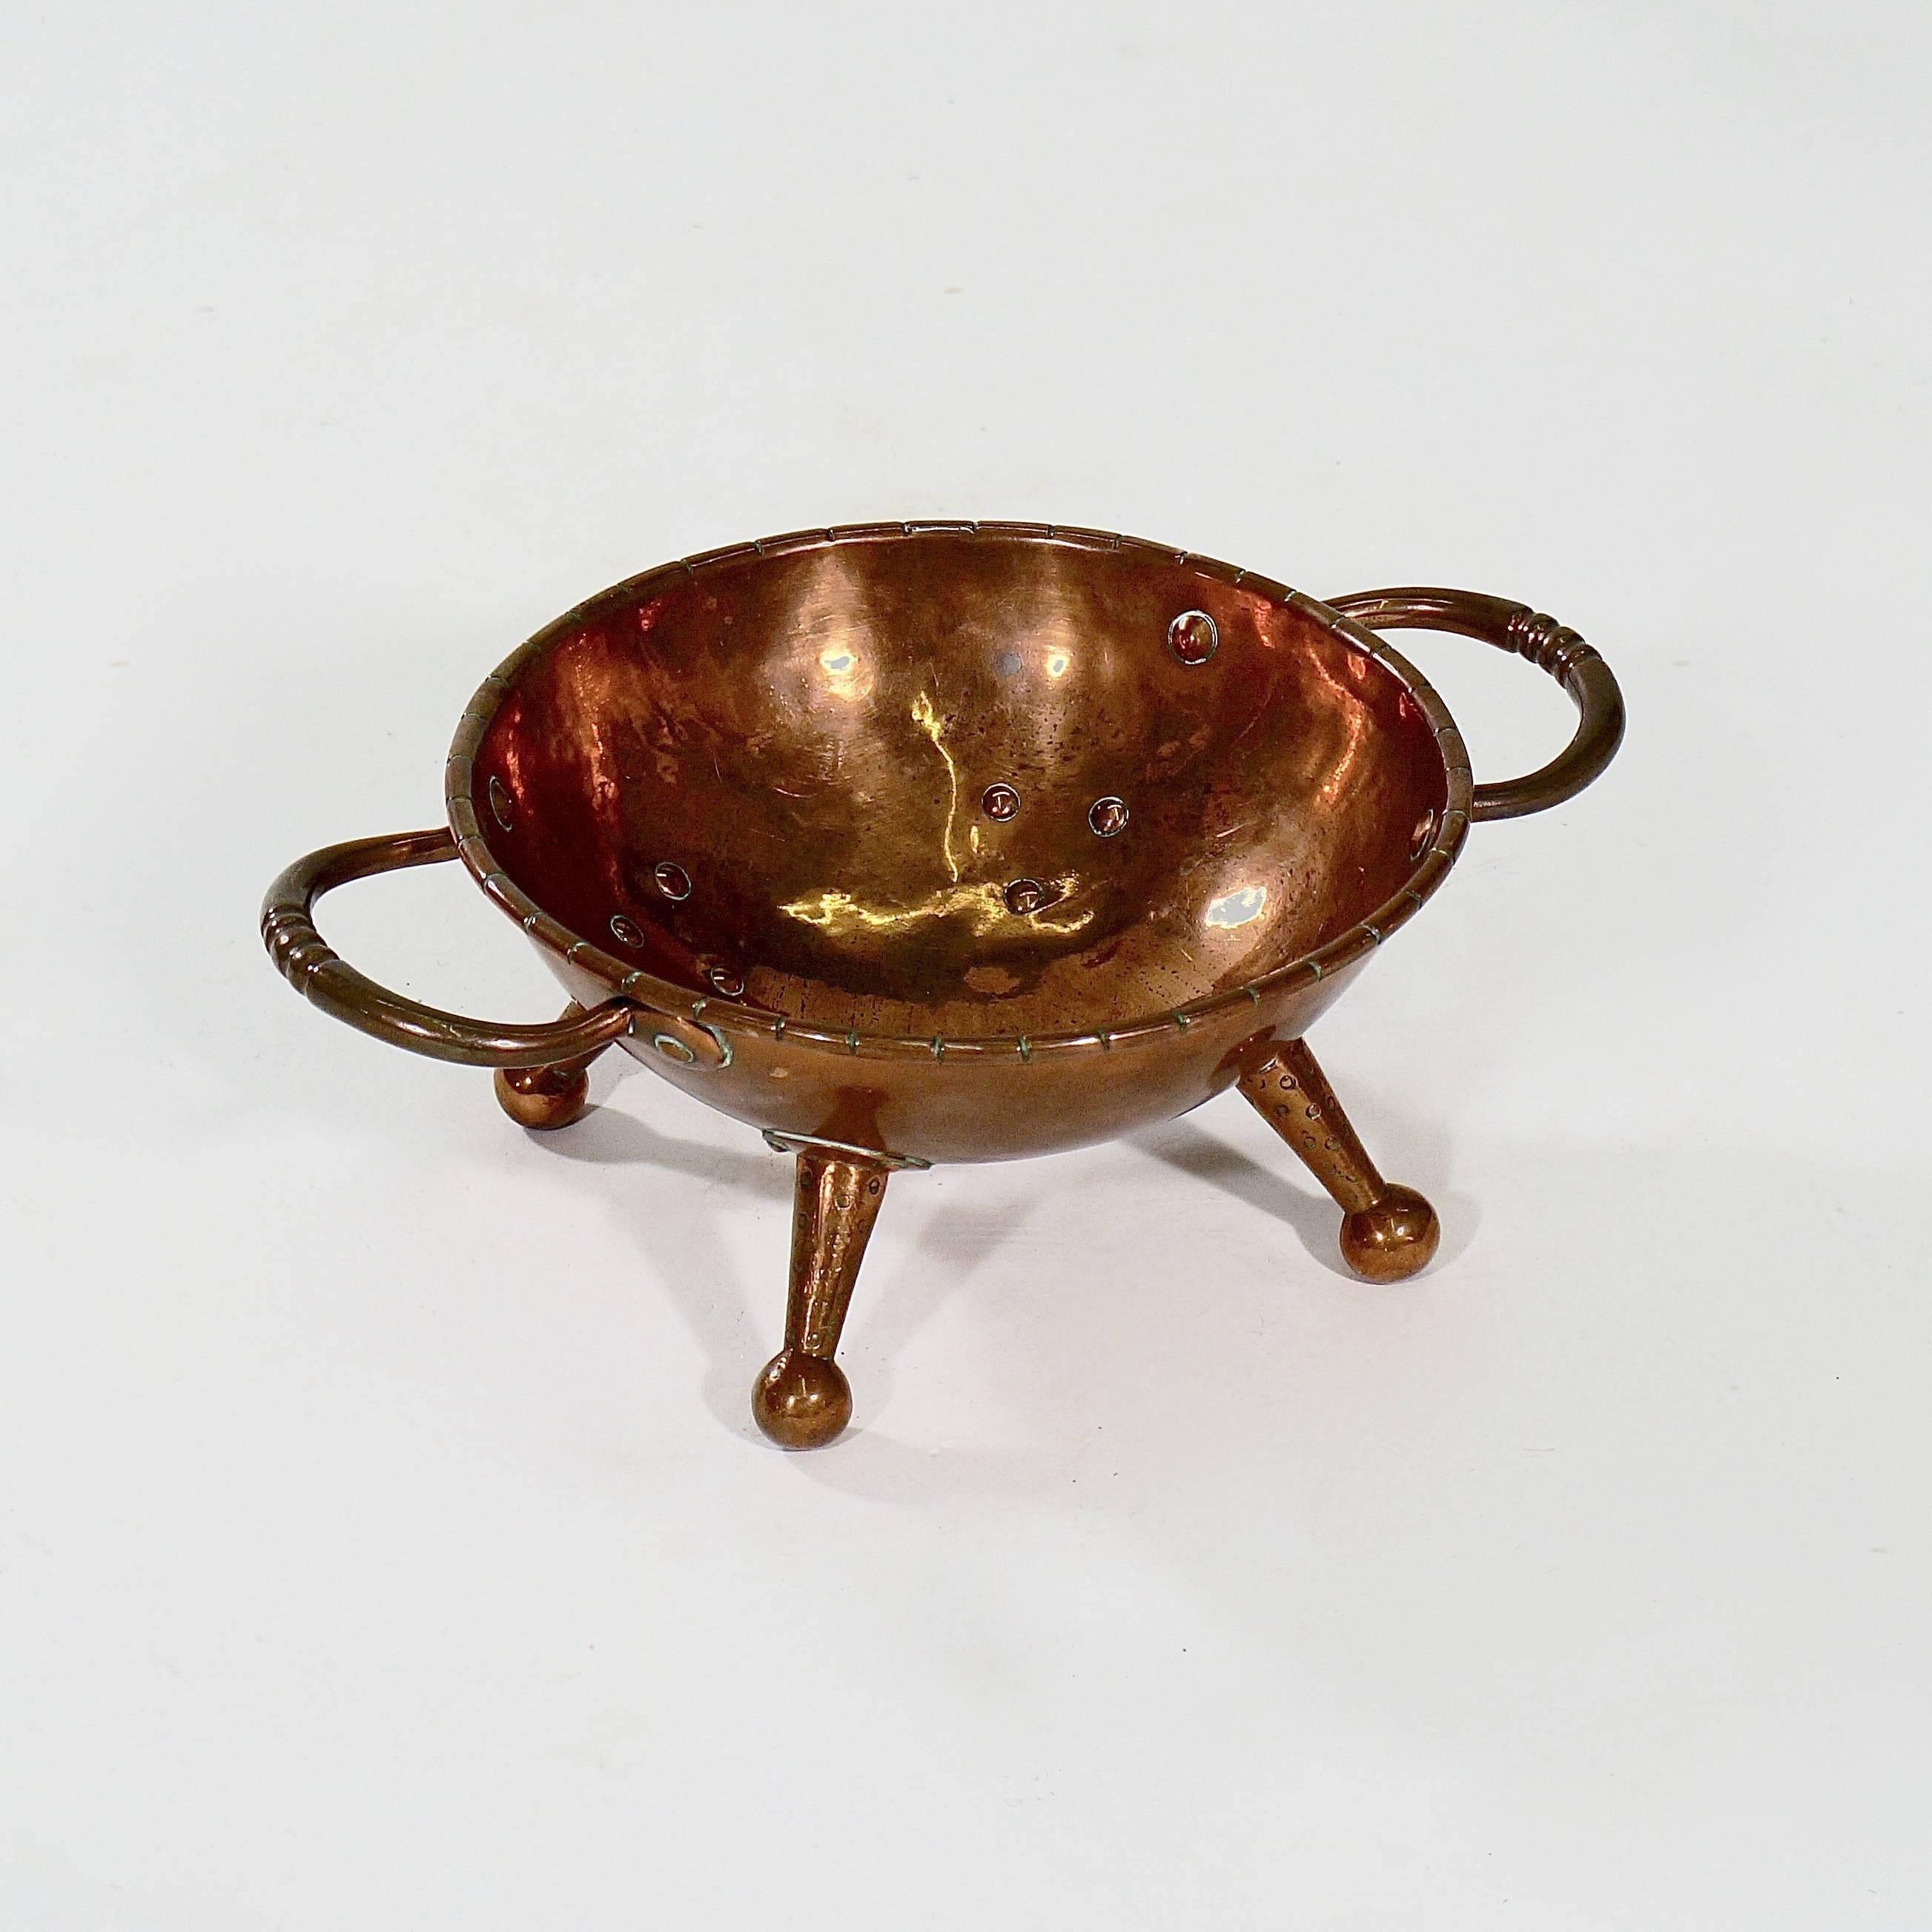 The bowl with a notched rim and supported by four rivetted drumstick feet.

England, circa 1860s.